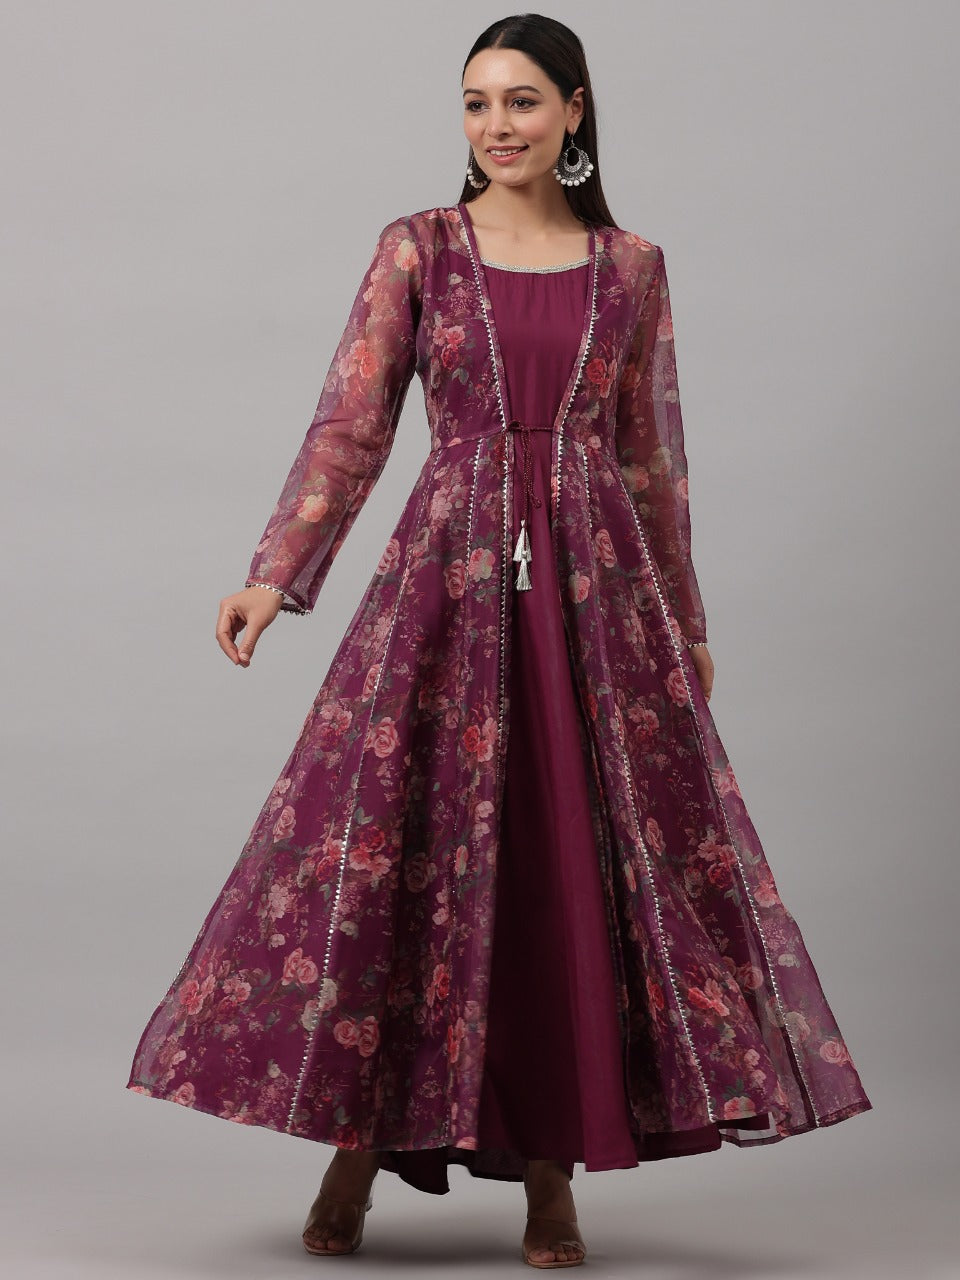 Long Jacket | Indian outfits, Indian fashion dresses, Indian gowns dresses